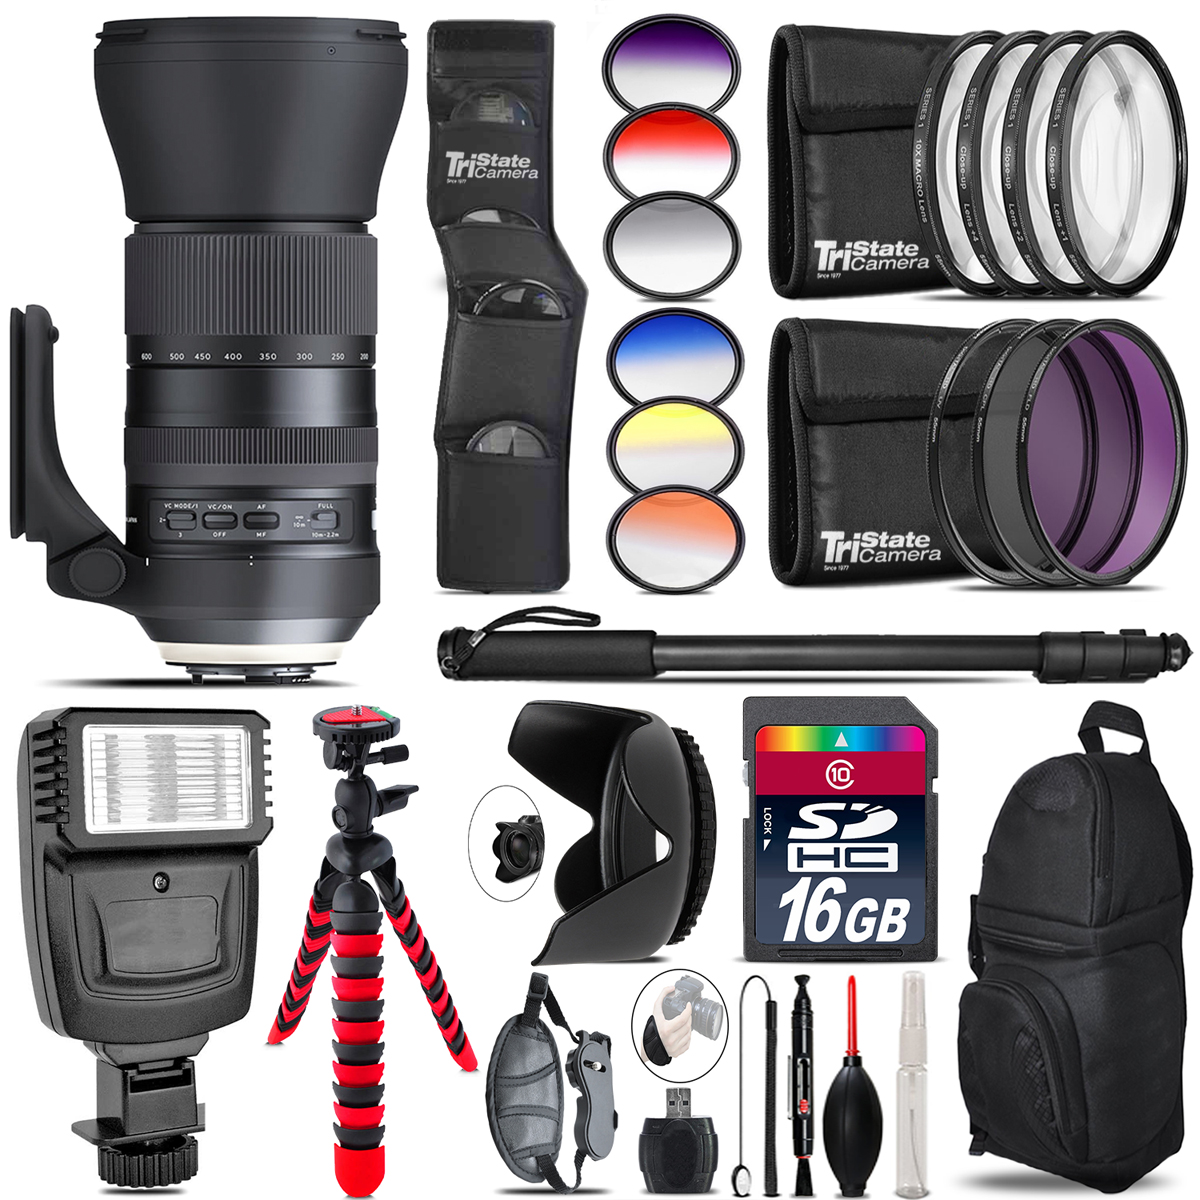 150-600mm G2 for Nikon + Flash + Color Filter Set - 16GB Accessory Kit *FREE SHIPPING*